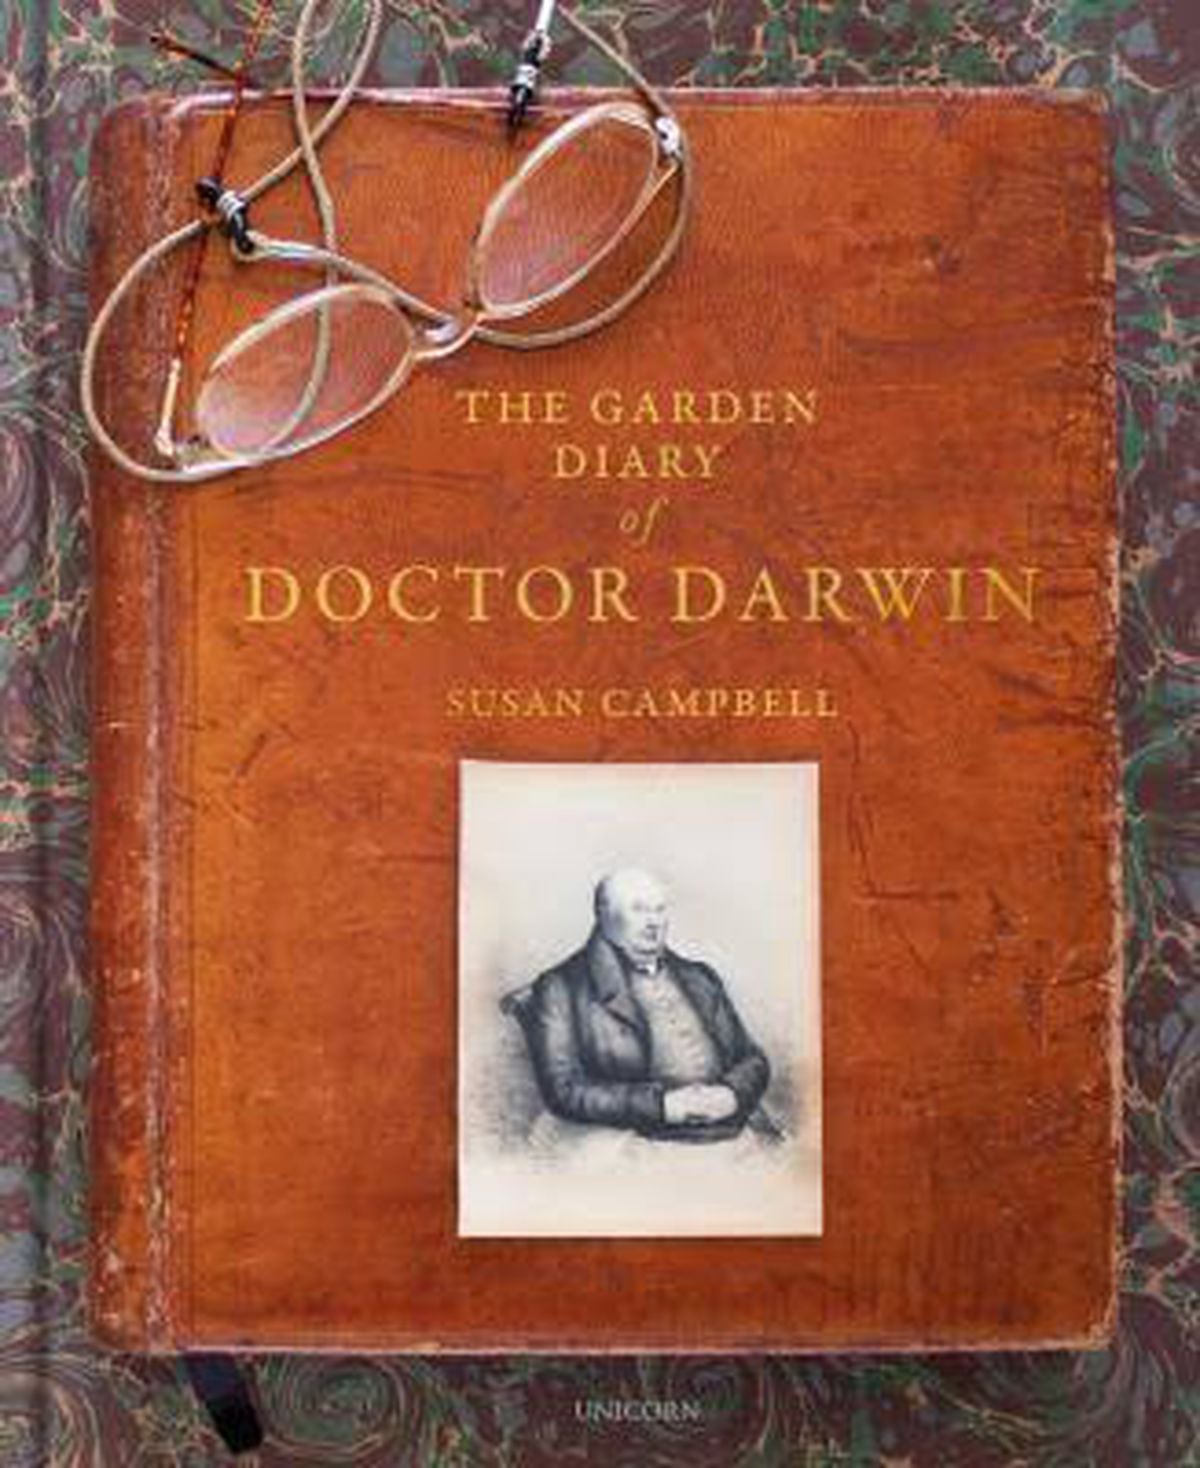 The Garden Diary of Doctor Darwin, by Susan Campbell